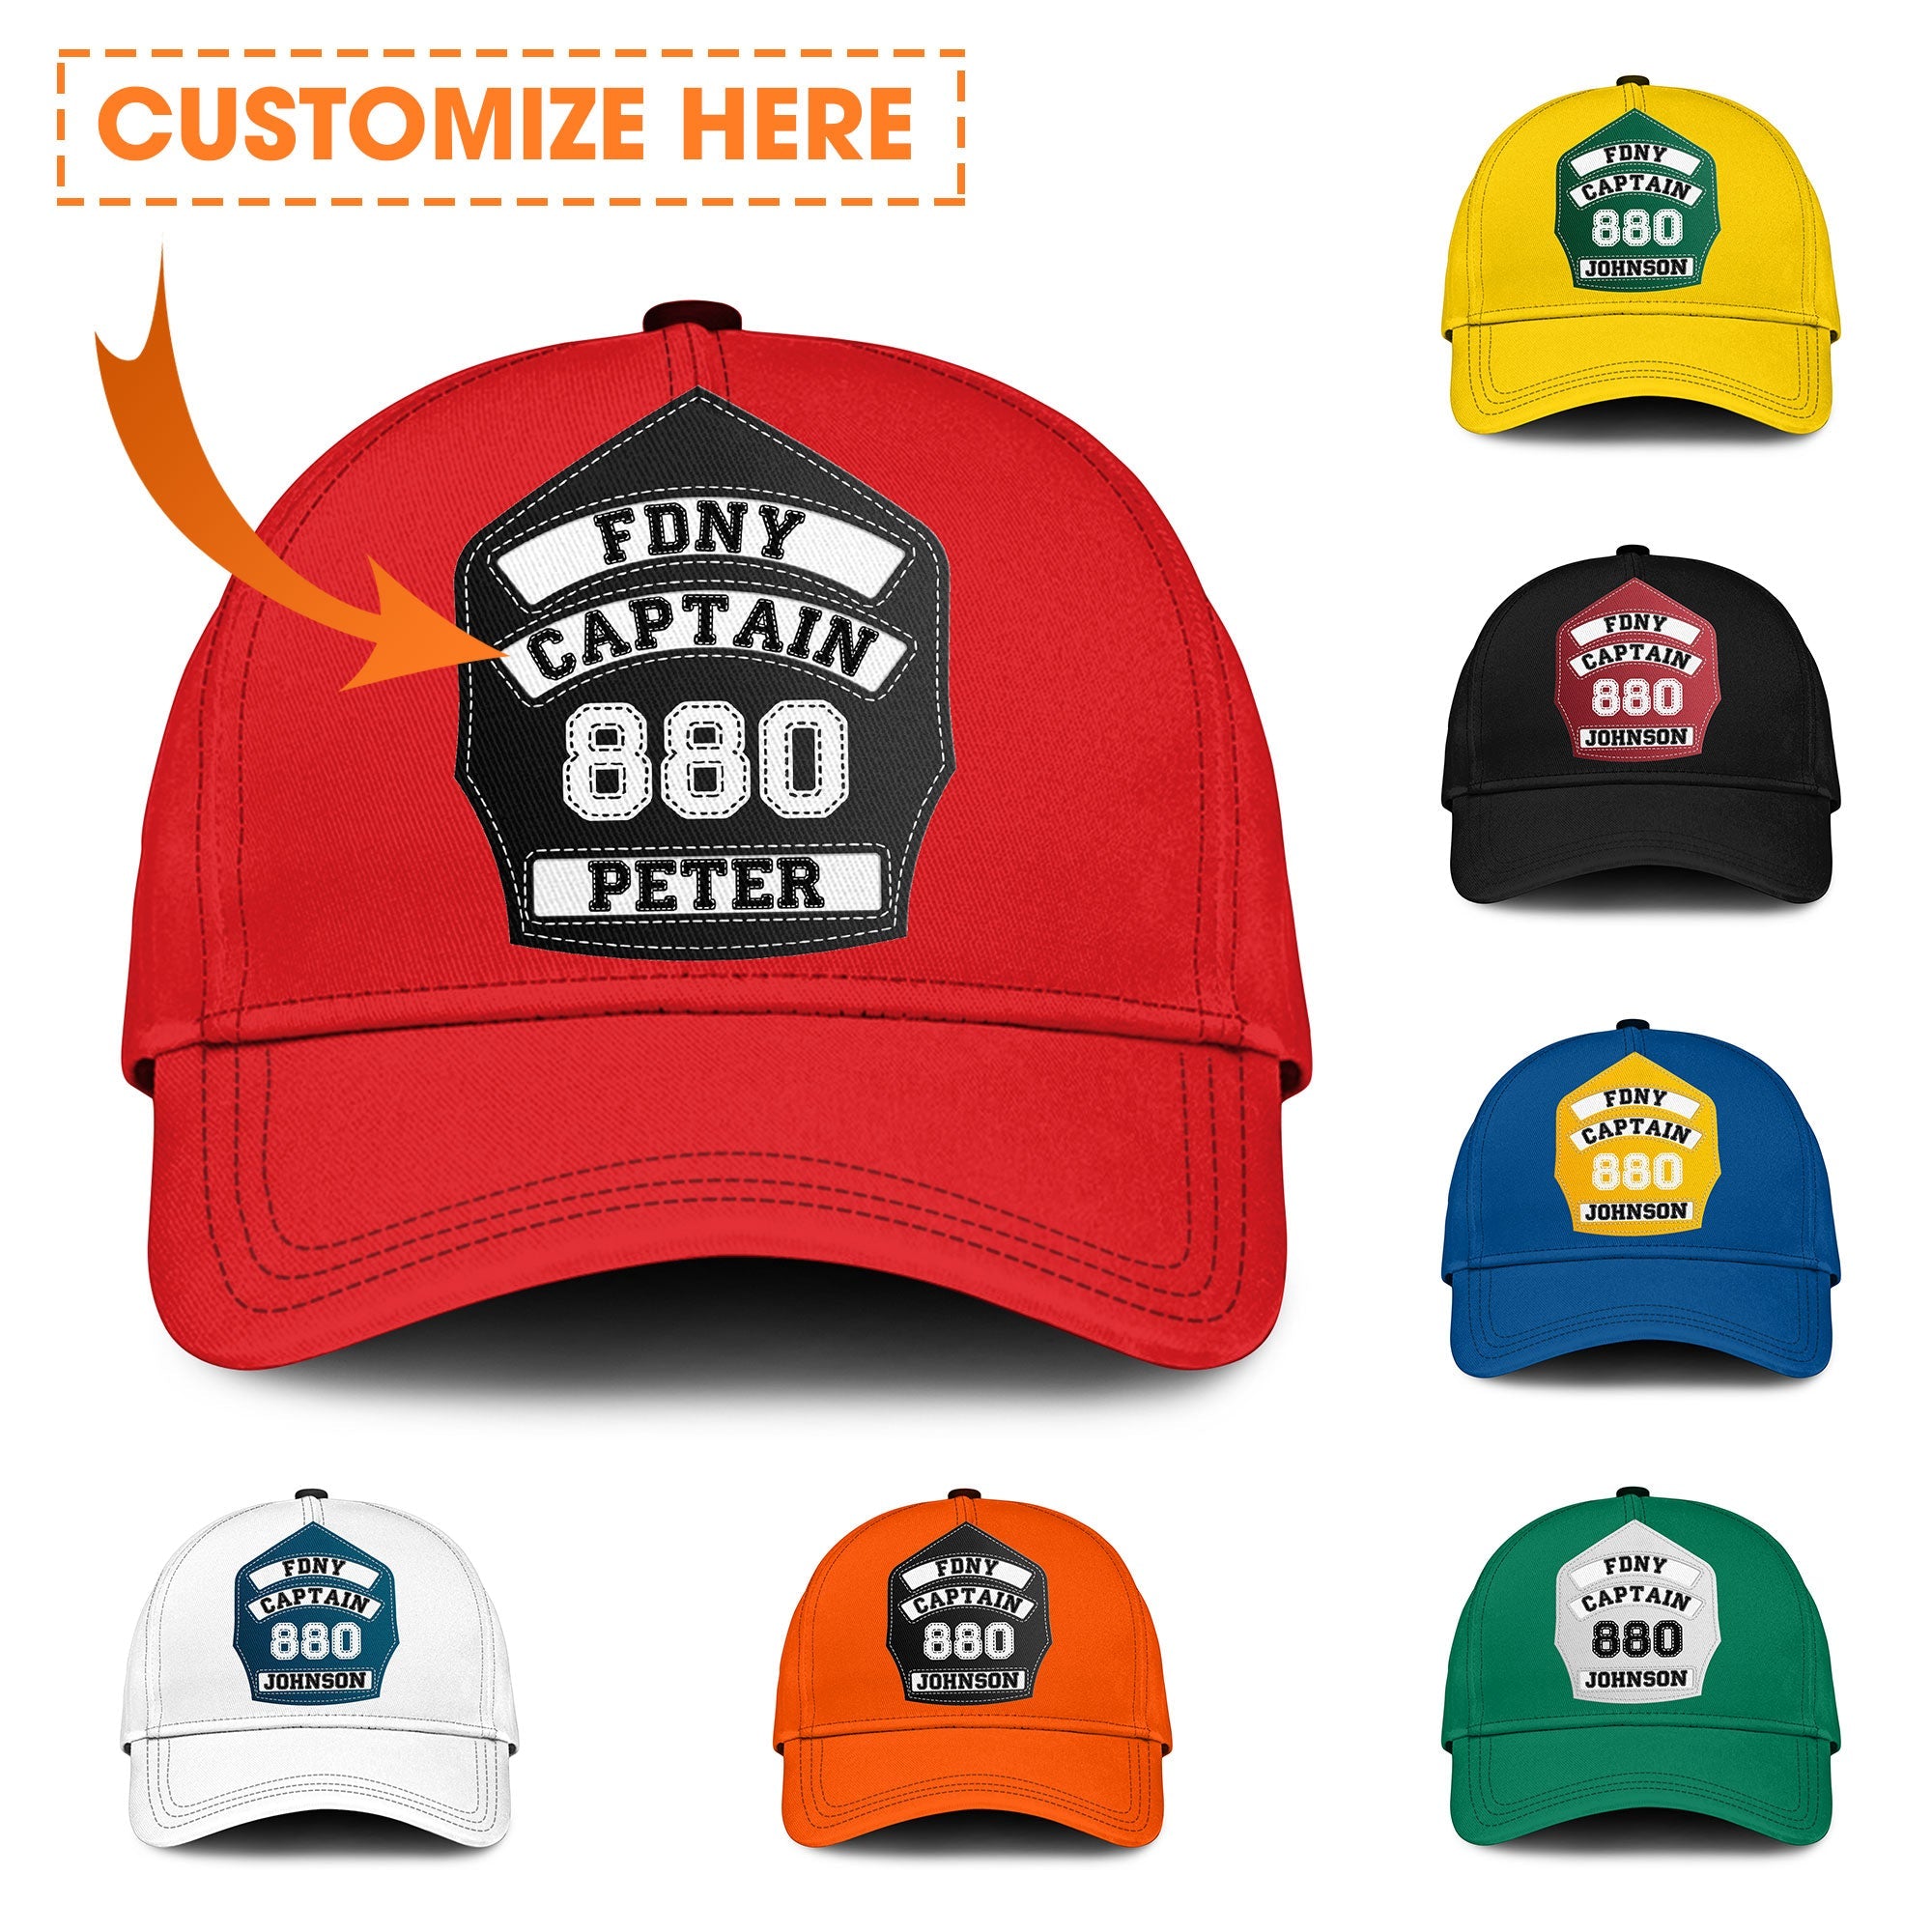 Firefighter’s Helmet Front Shield Personalized Classic Cap